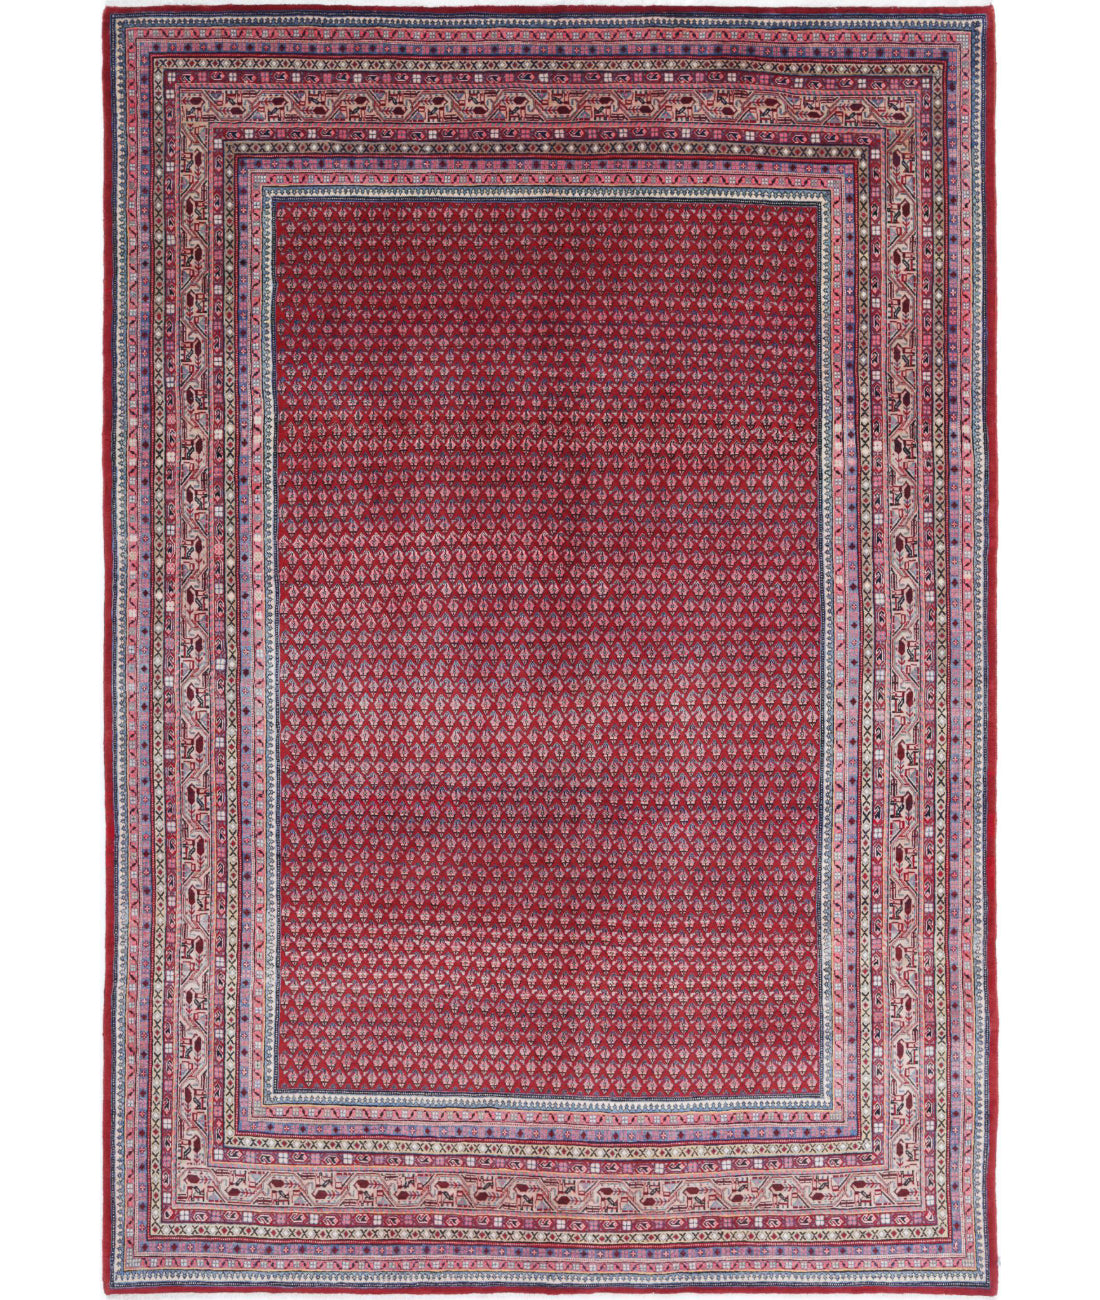 Hand Knotted Persian Mir Saraband Wool Rug - 6'10'' x 10'2'' 6'10'' x 10'2'' (205 X 305) / Red / Multi